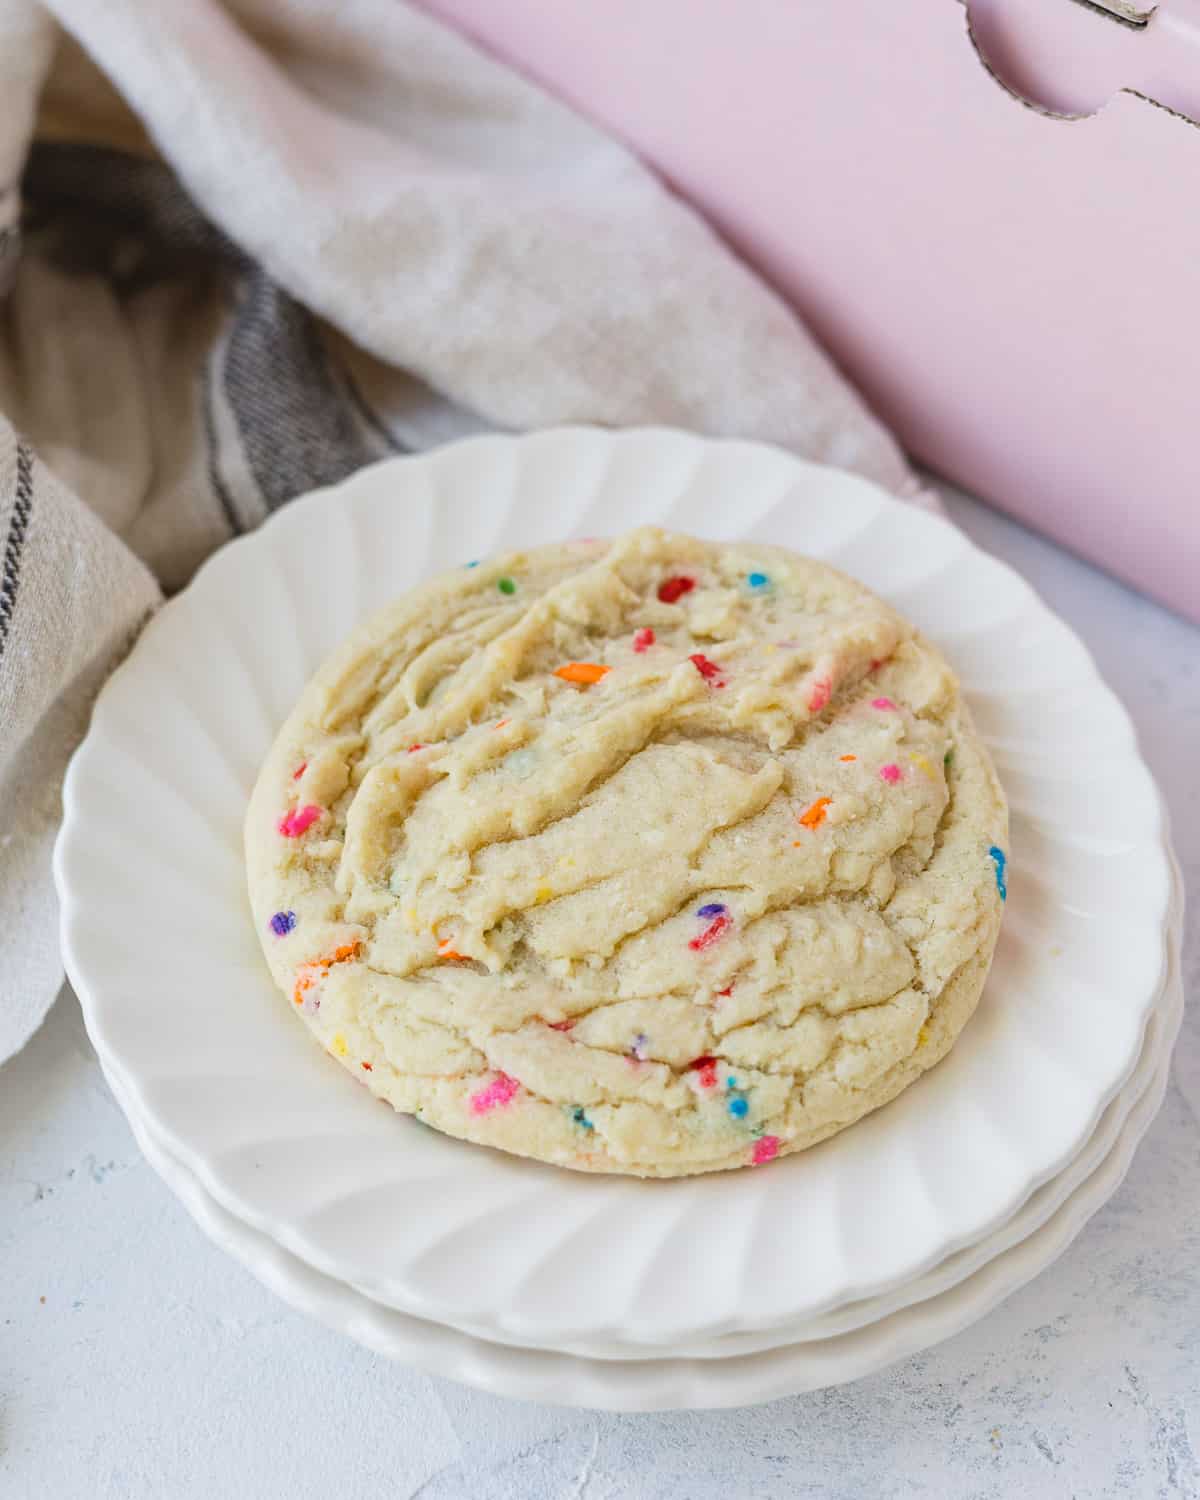 Crumbl Funfetti Cookie with sprinkles on a plate.